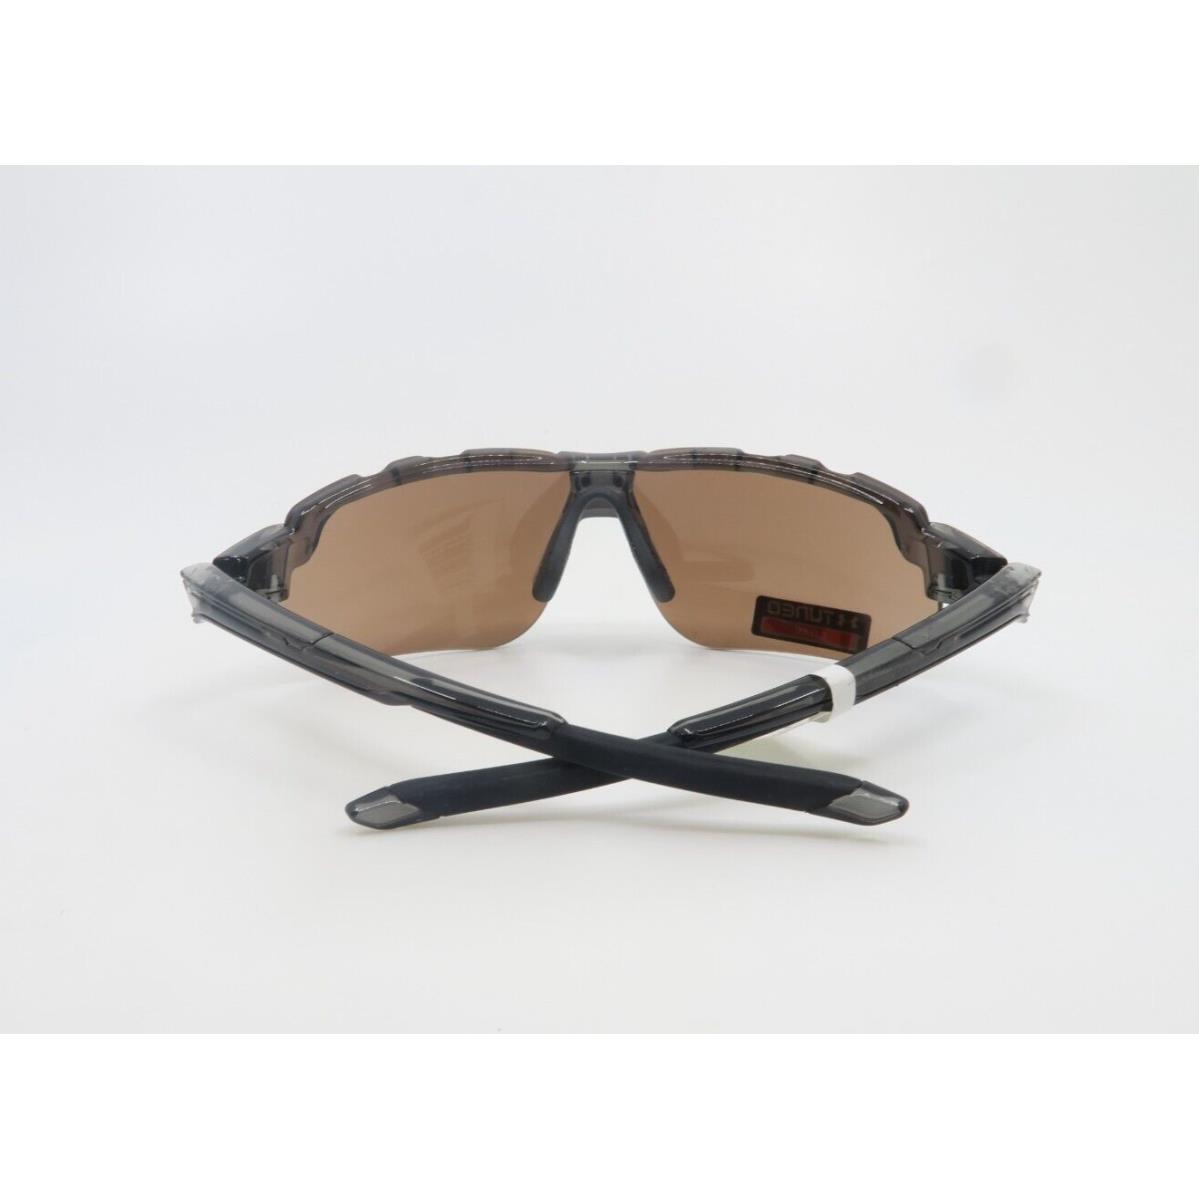 Under Armour sunglasses Tuned Road - Grey Frame, Smoke Brown Lens 8